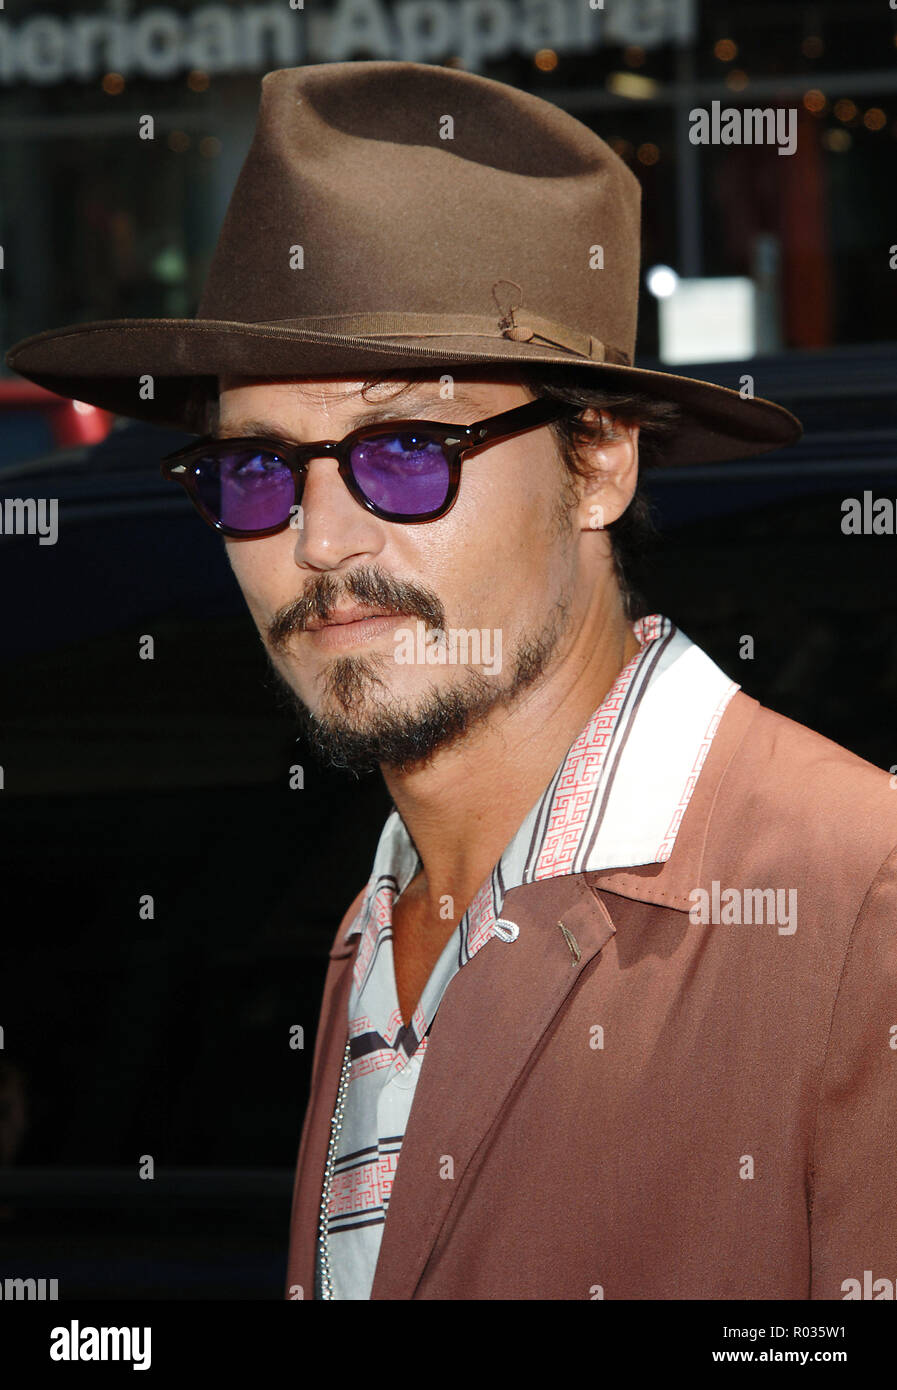 Johnny Depp arriving at the Charlie And The Chocolat Factory Premiere at the Chinese Theatre In Los Angeles. Jyly 10, 2005. 01 DeppJohnny017 Red Carpet Event, Vertical, USA, Film Industry, Celebrities,  Photography, Bestof, Arts Culture and Entertainment, Topix Celebrities fashion /  Vertical, Best of, Event in Hollywood Life - California,  Red Carpet and backstage, USA, Film Industry, Celebrities,  movie celebrities, TV celebrities, Music celebrities, Photography, Bestof, Arts Culture and Entertainment,  Topix, headshot, vertical, one person,, from the year , 2005, inquiry tsuni@Gamma-USA.com Stock Photo